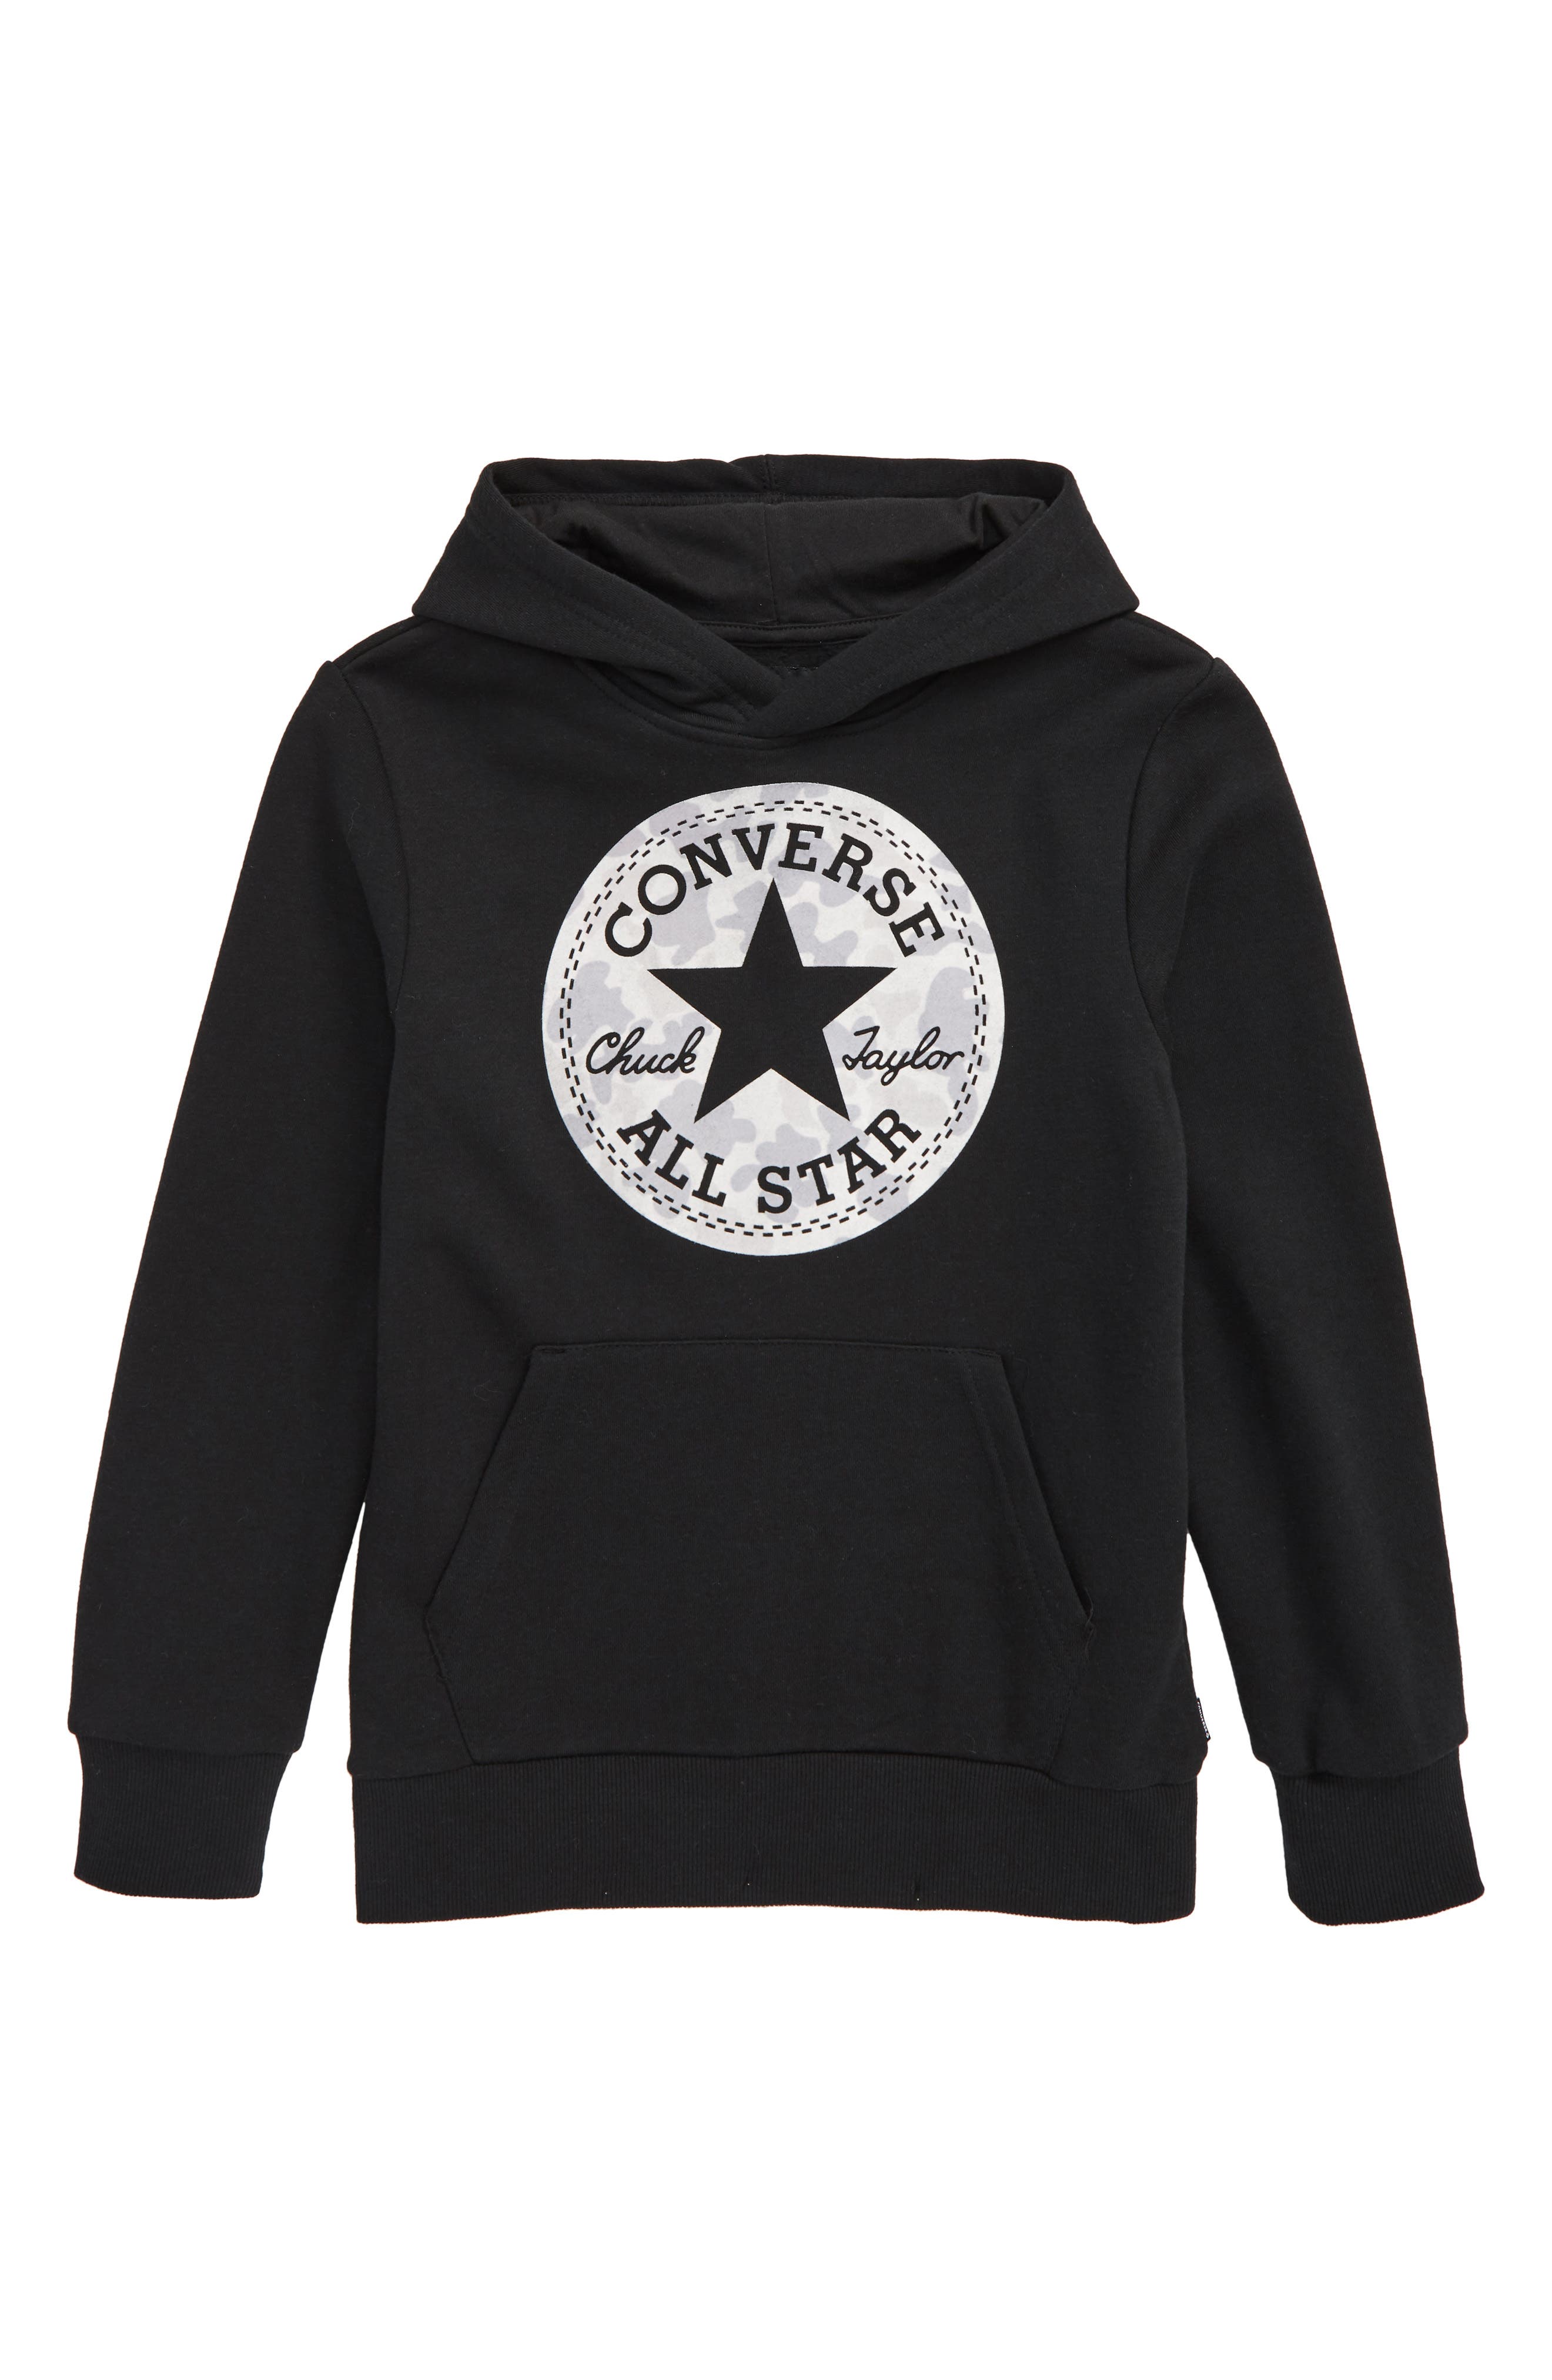 converse chuck taylor all star hoodie